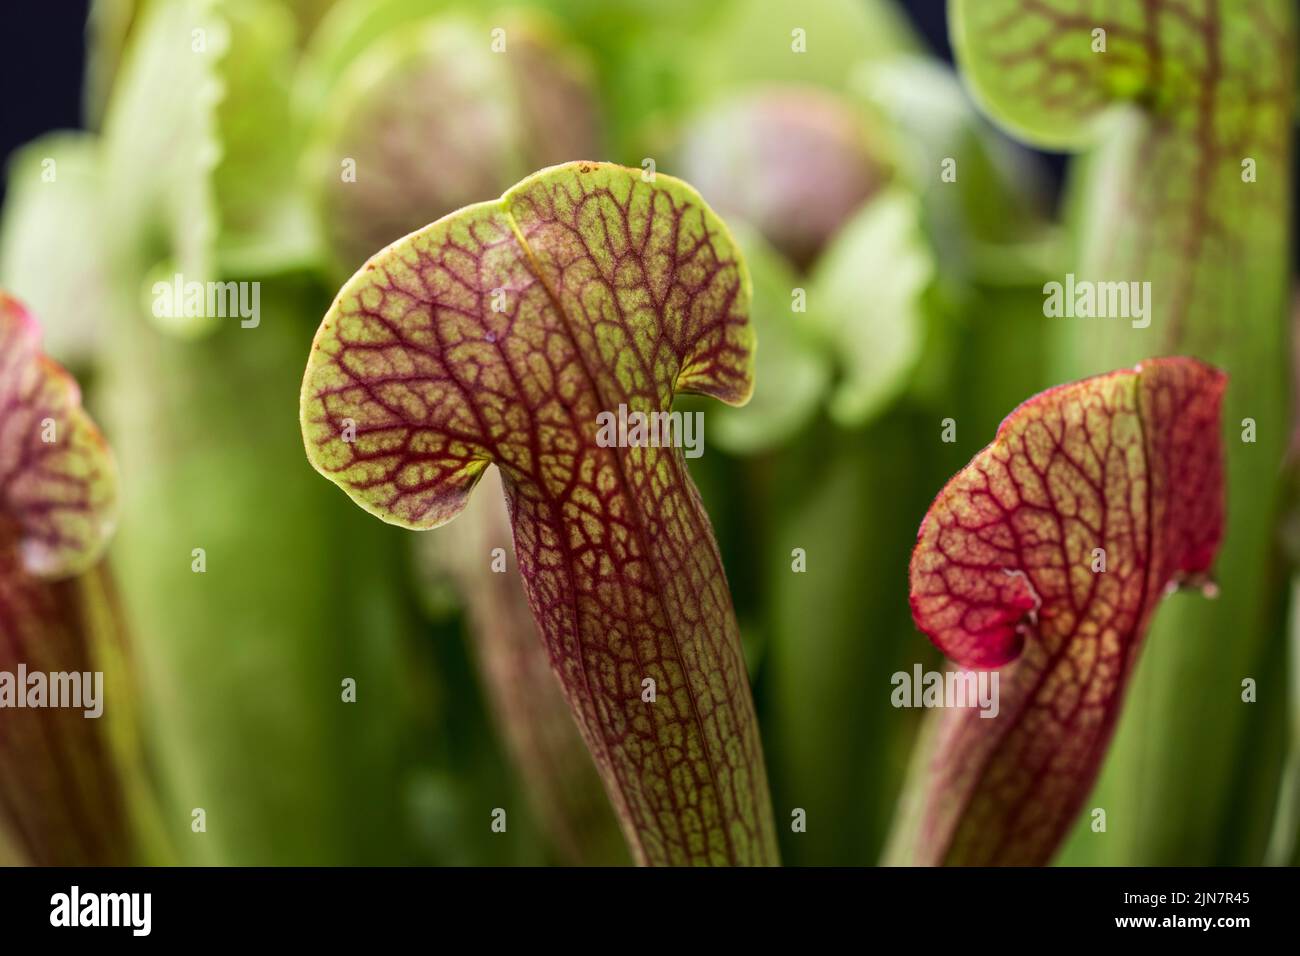 Trumpet pitcher plant close up trumpet pitcher plant with red veining on leaves. Stock Photo